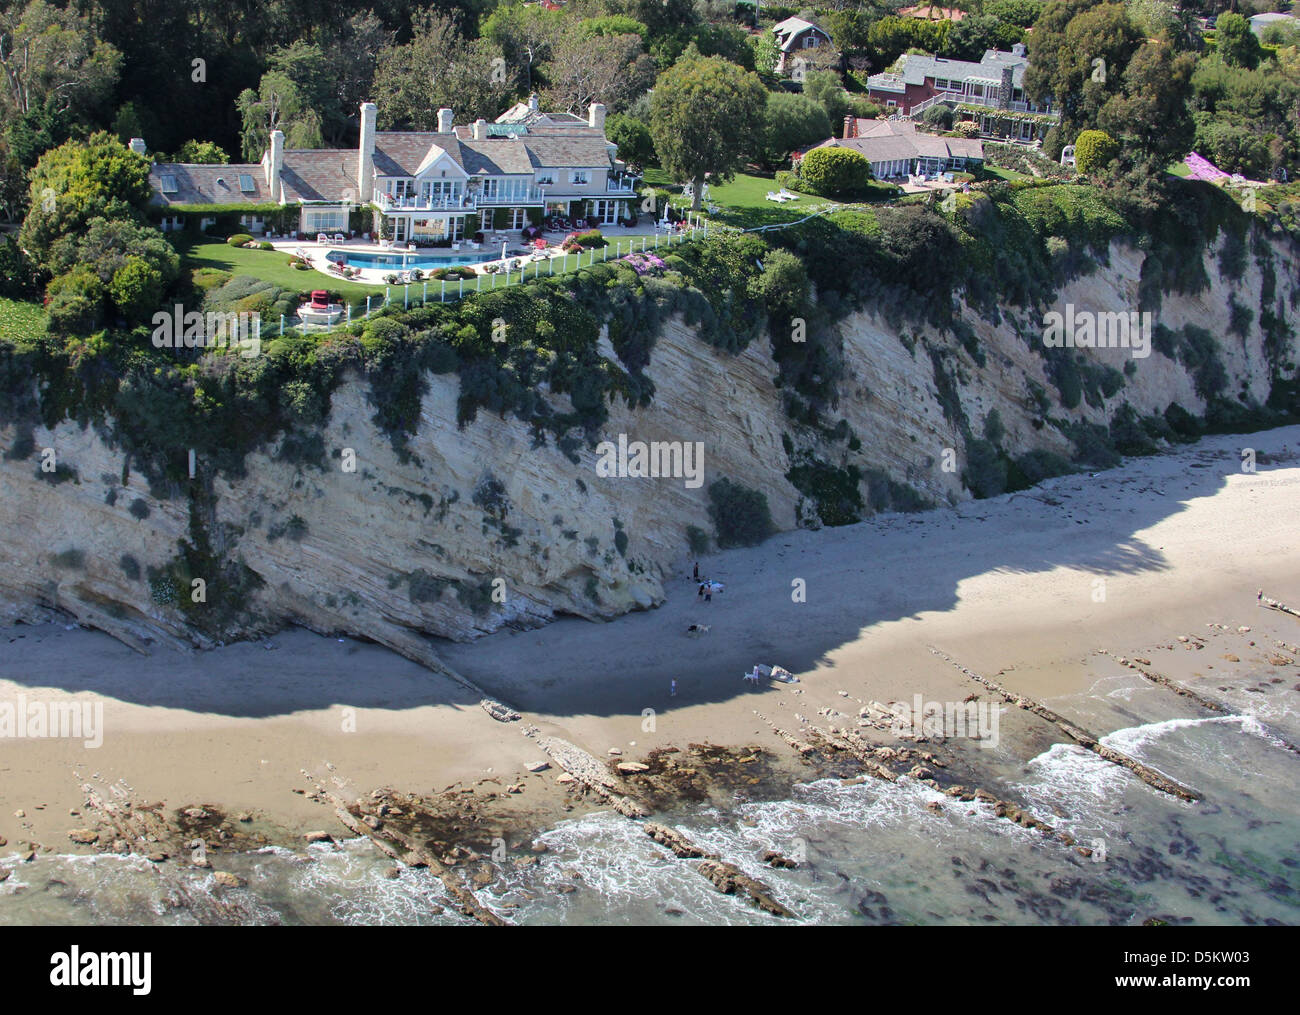 Aerial View Of Barbra Streisand S Home In Malibu Los Angeles Stock Photo Alamy,What Is A Coastal Living Room